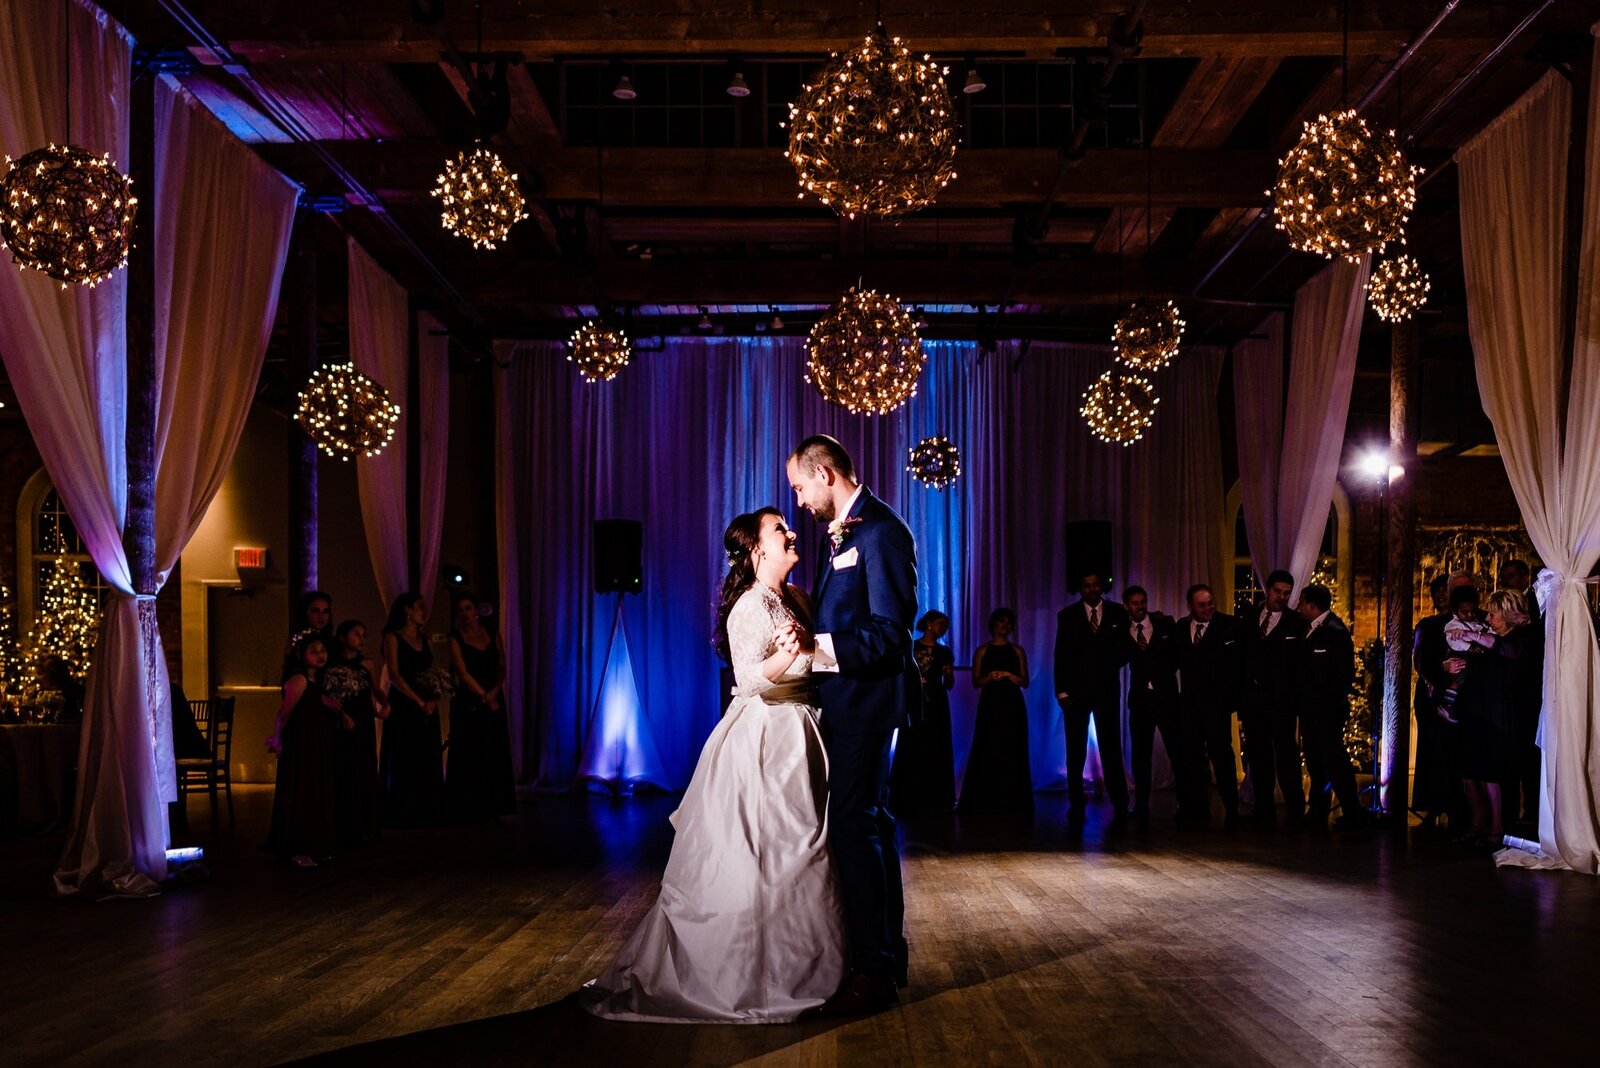 Couple in wedding attire shares their first dance at The Cotton Room